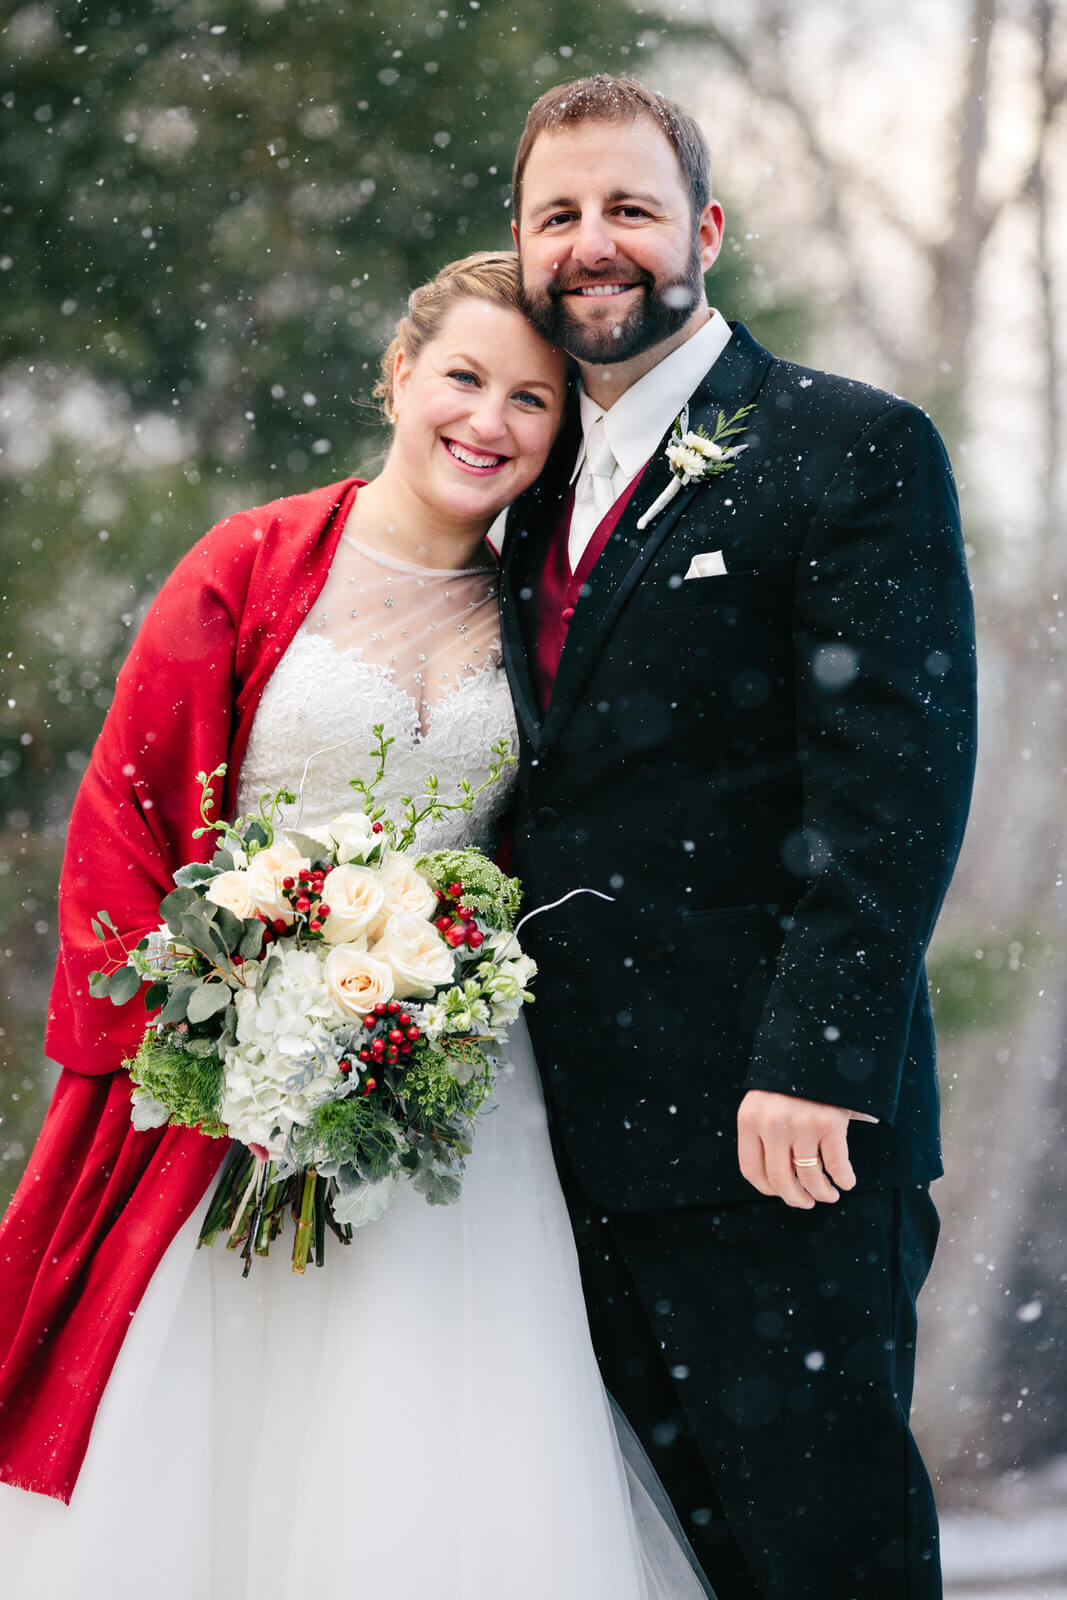 A bride and groom smile as snowflakes fall during their winter wedding in Missoula Montana